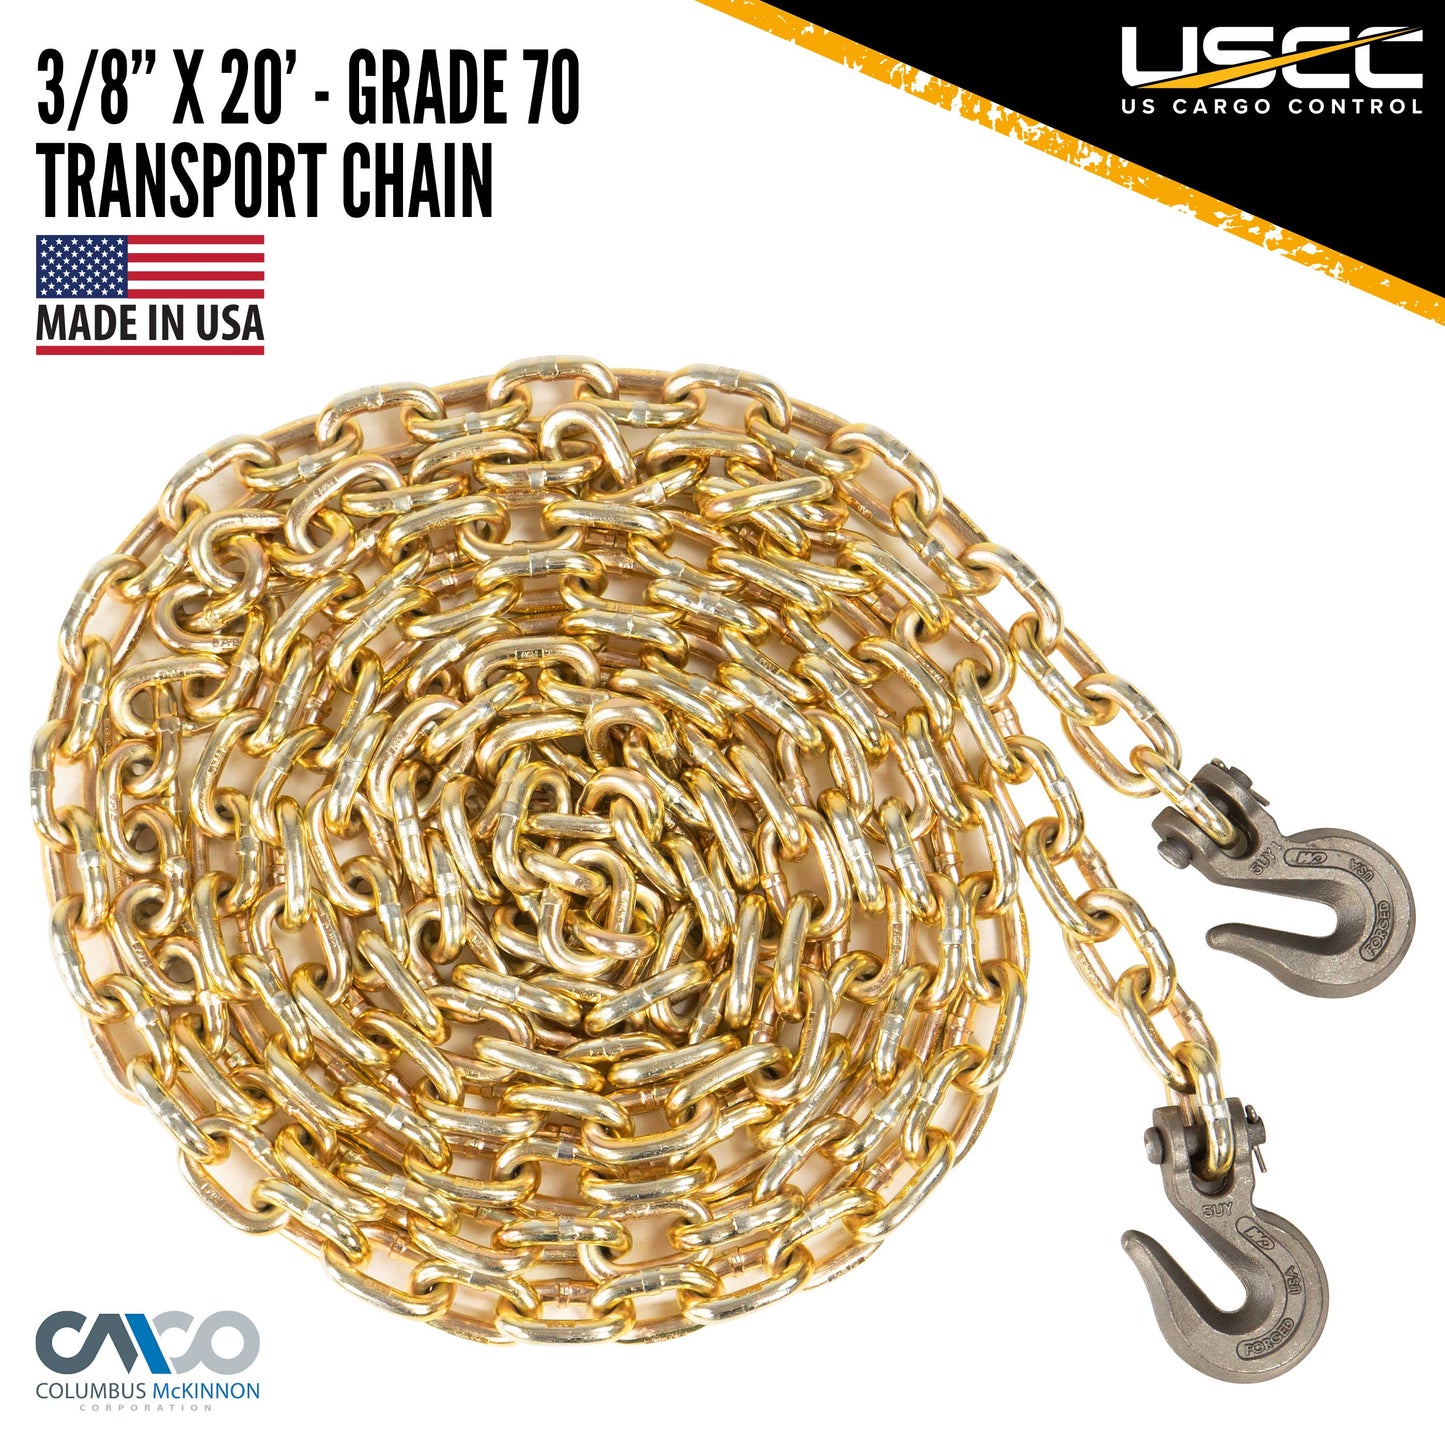 Grade 70 38 inch x 20 foot Chain Ratchet Chain Binder Made in USA Package image 3 of 8